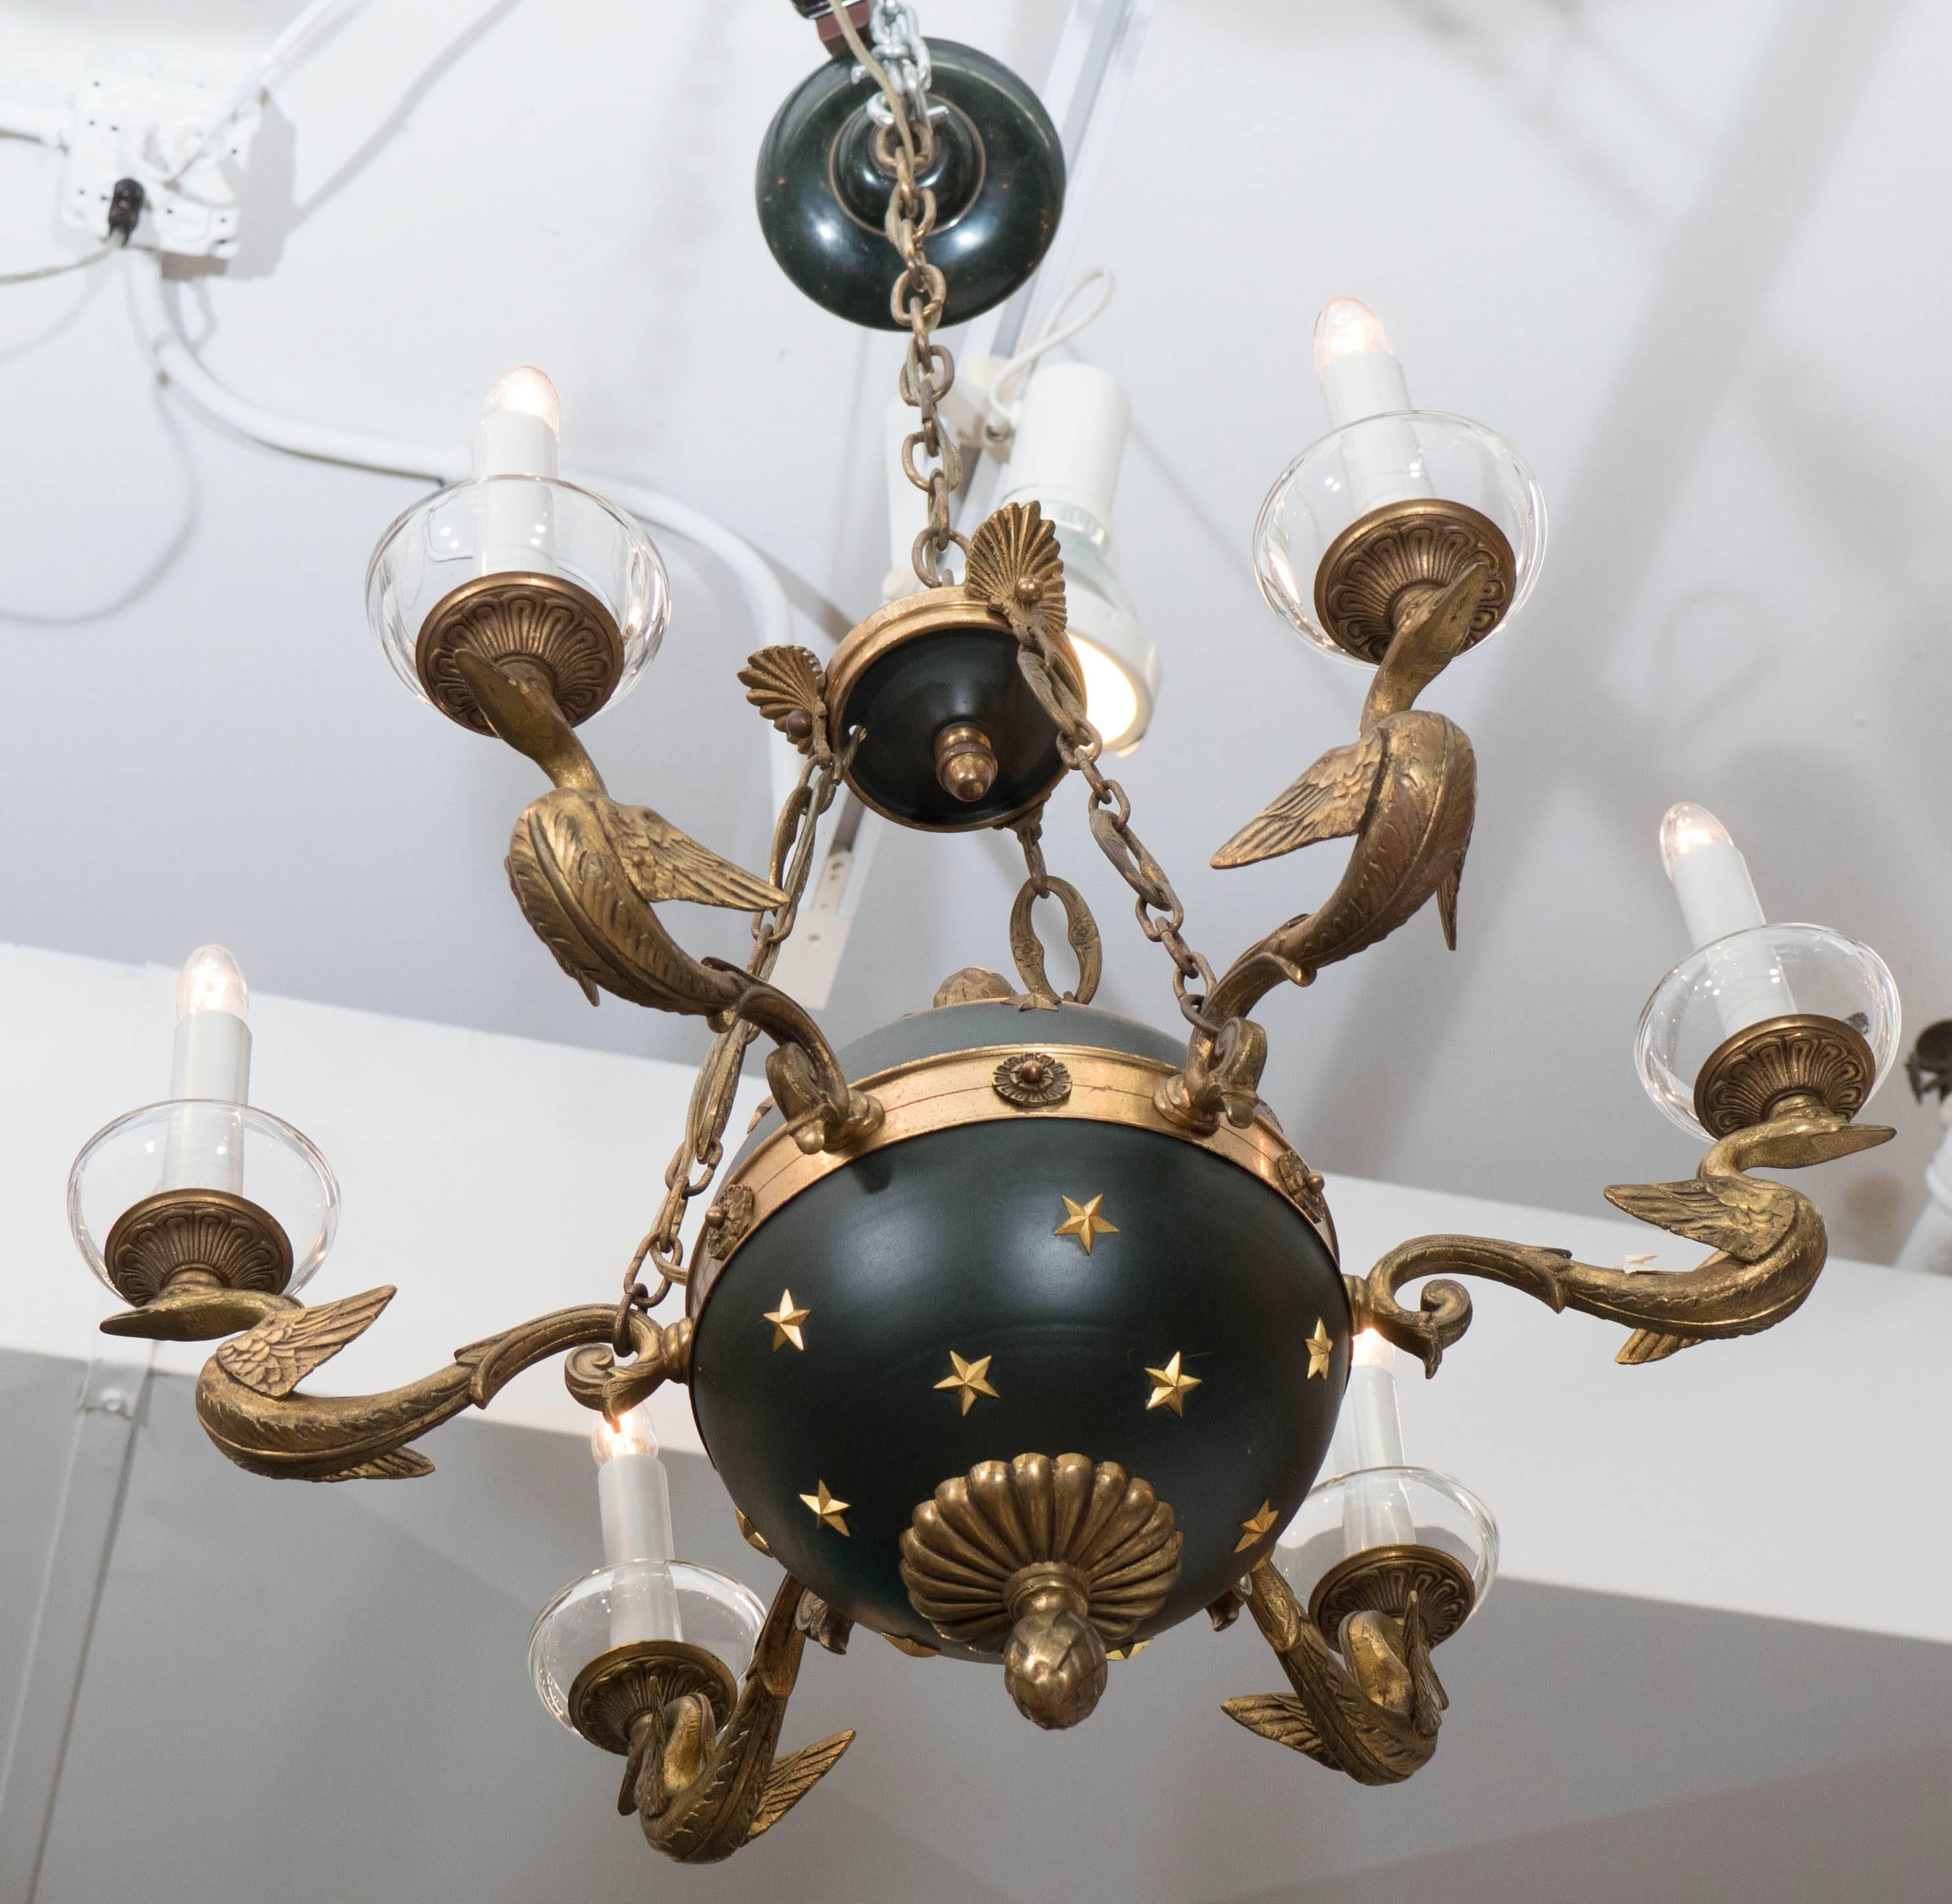 Glass French Empire Style Chandelier with Celestial Globe and Swan Motif